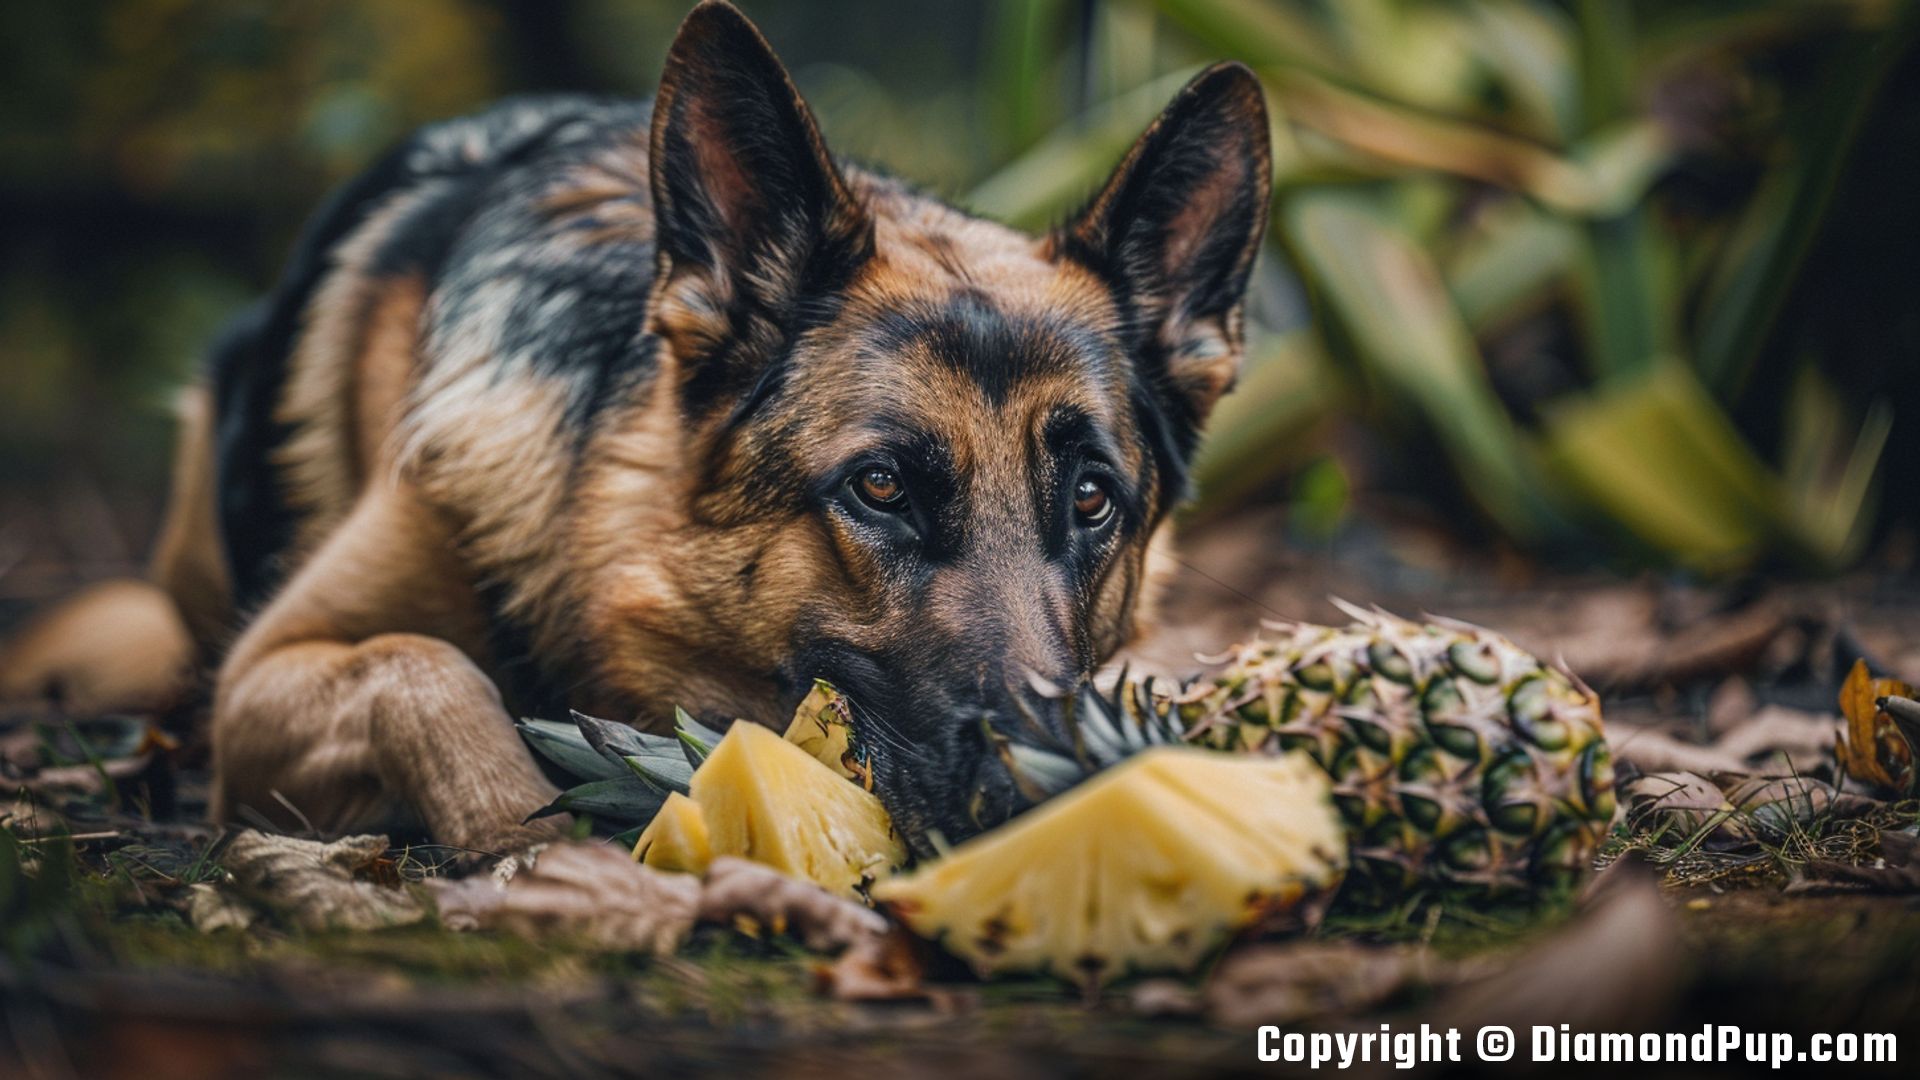 Photograph of a Playful German Shepherd Snacking on Pineapple